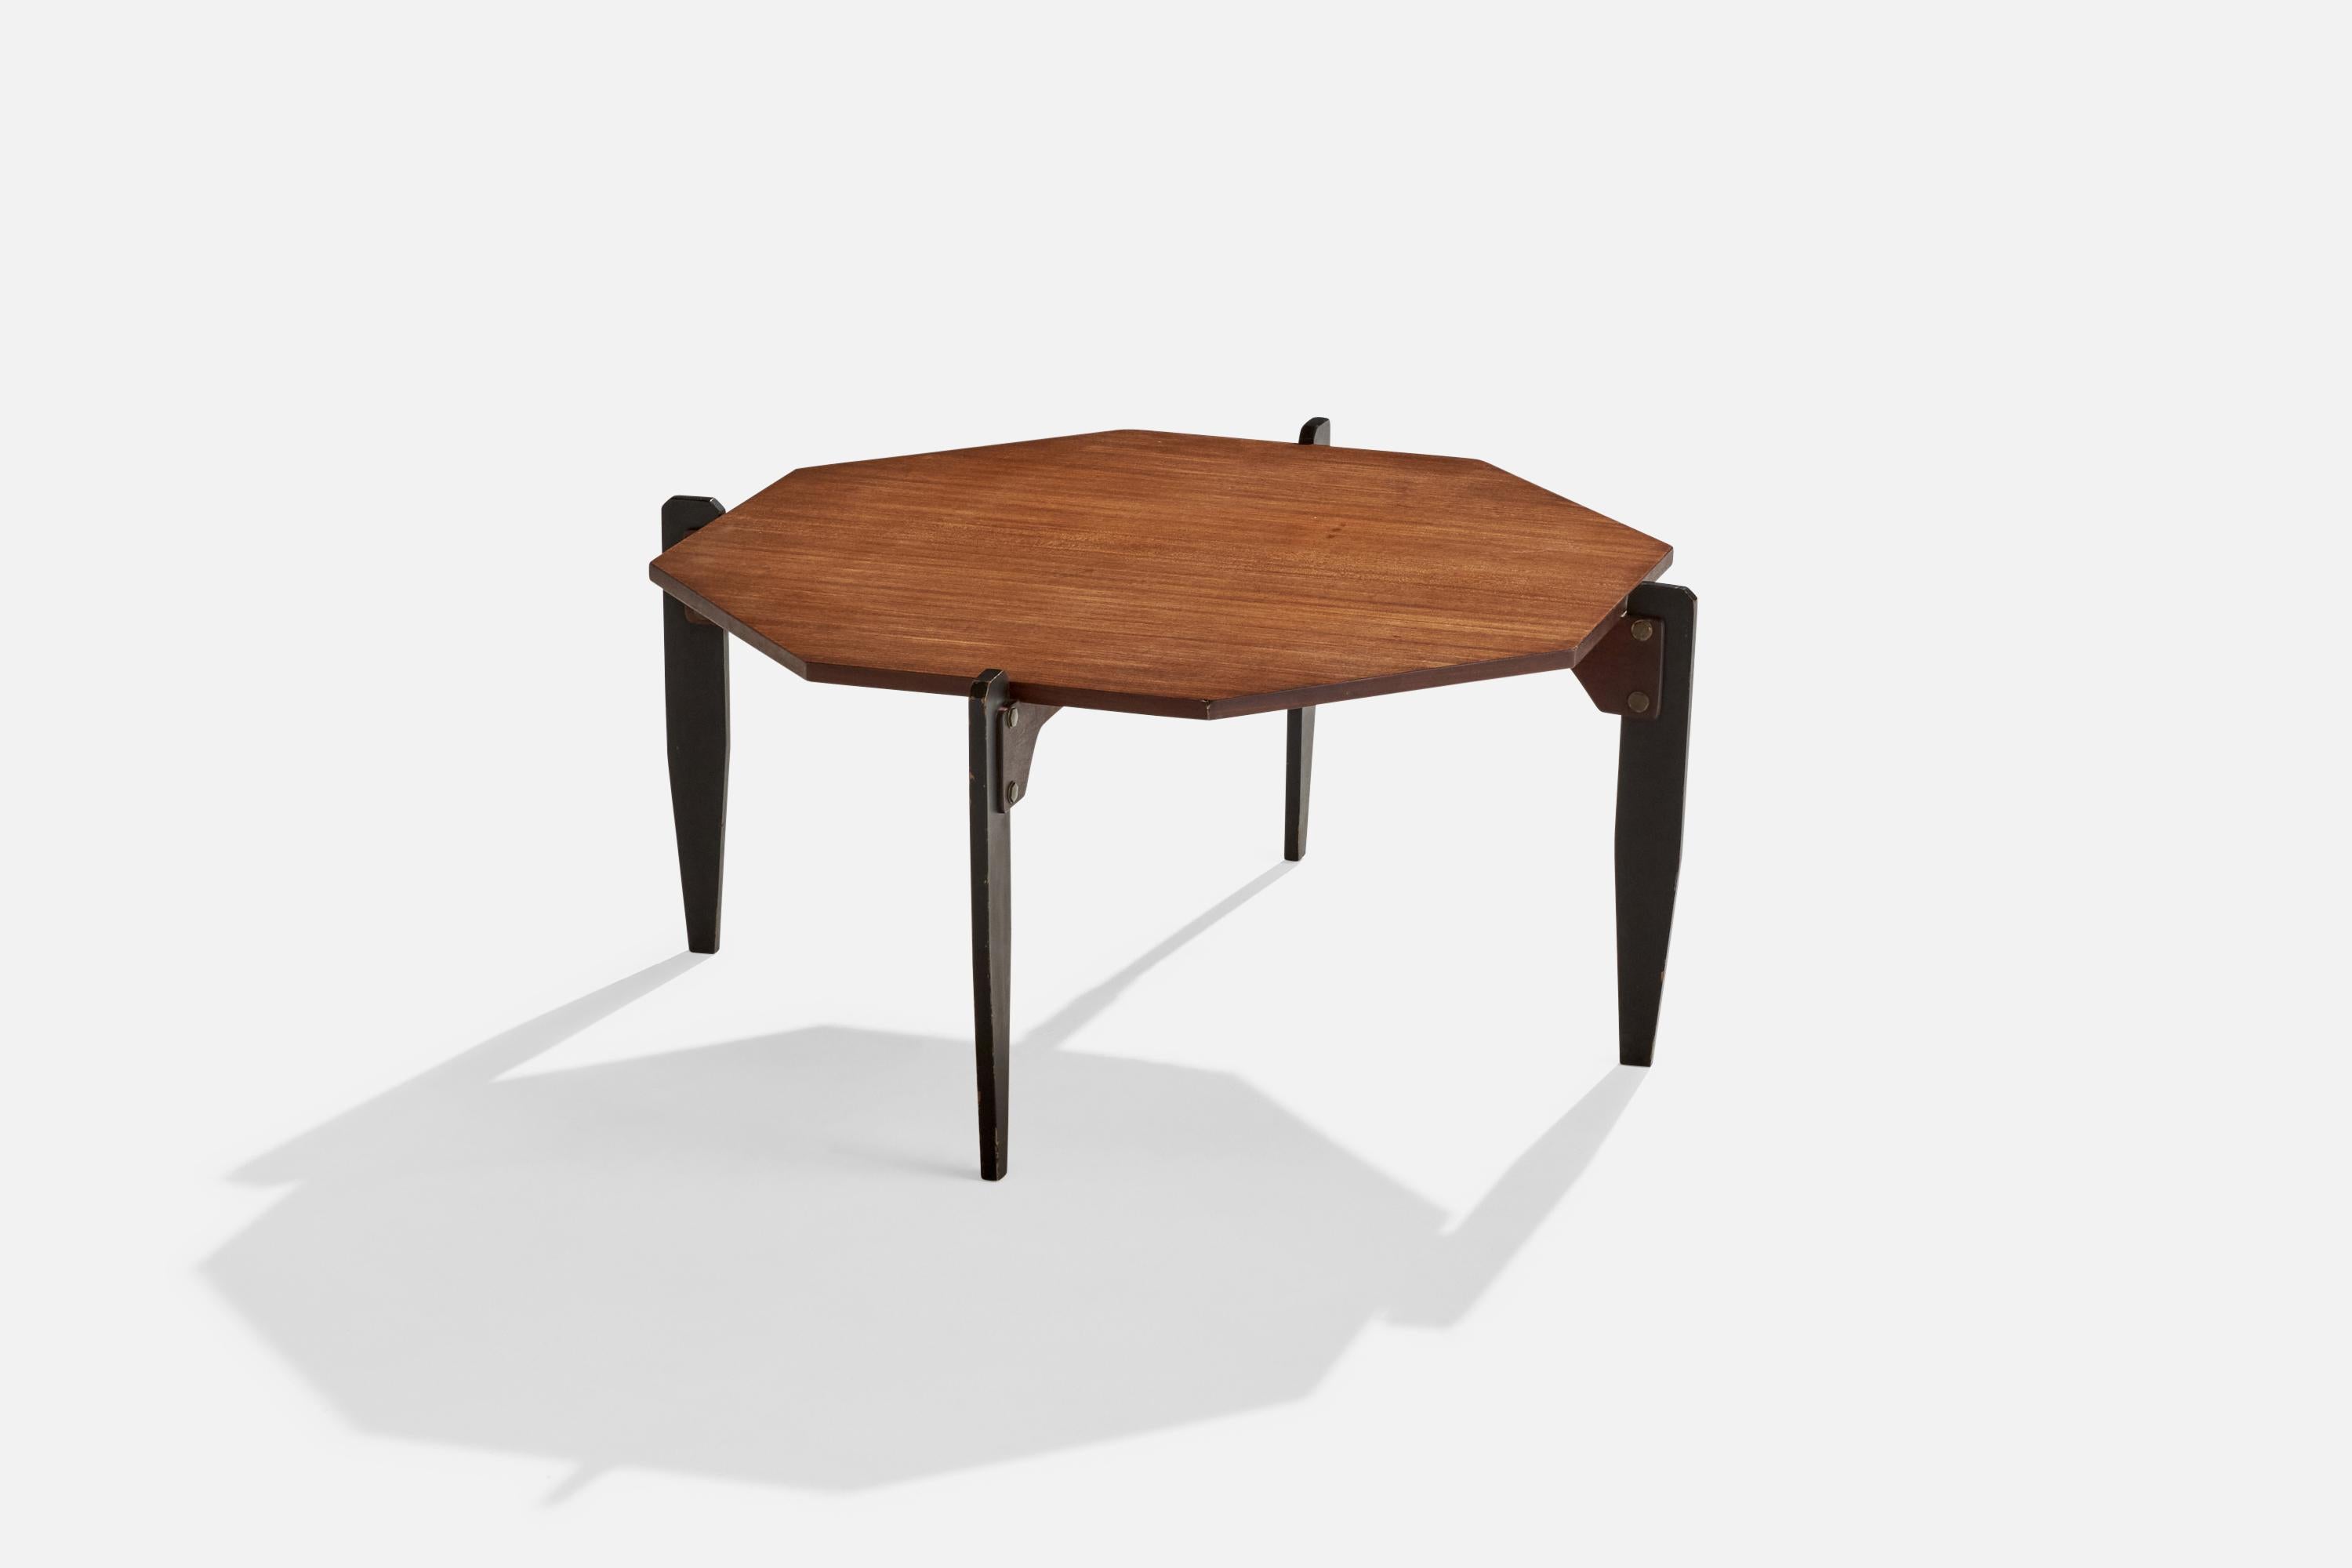 A teak, black-painted wood and brass coffee table designed and produced in Italy, 1950s.